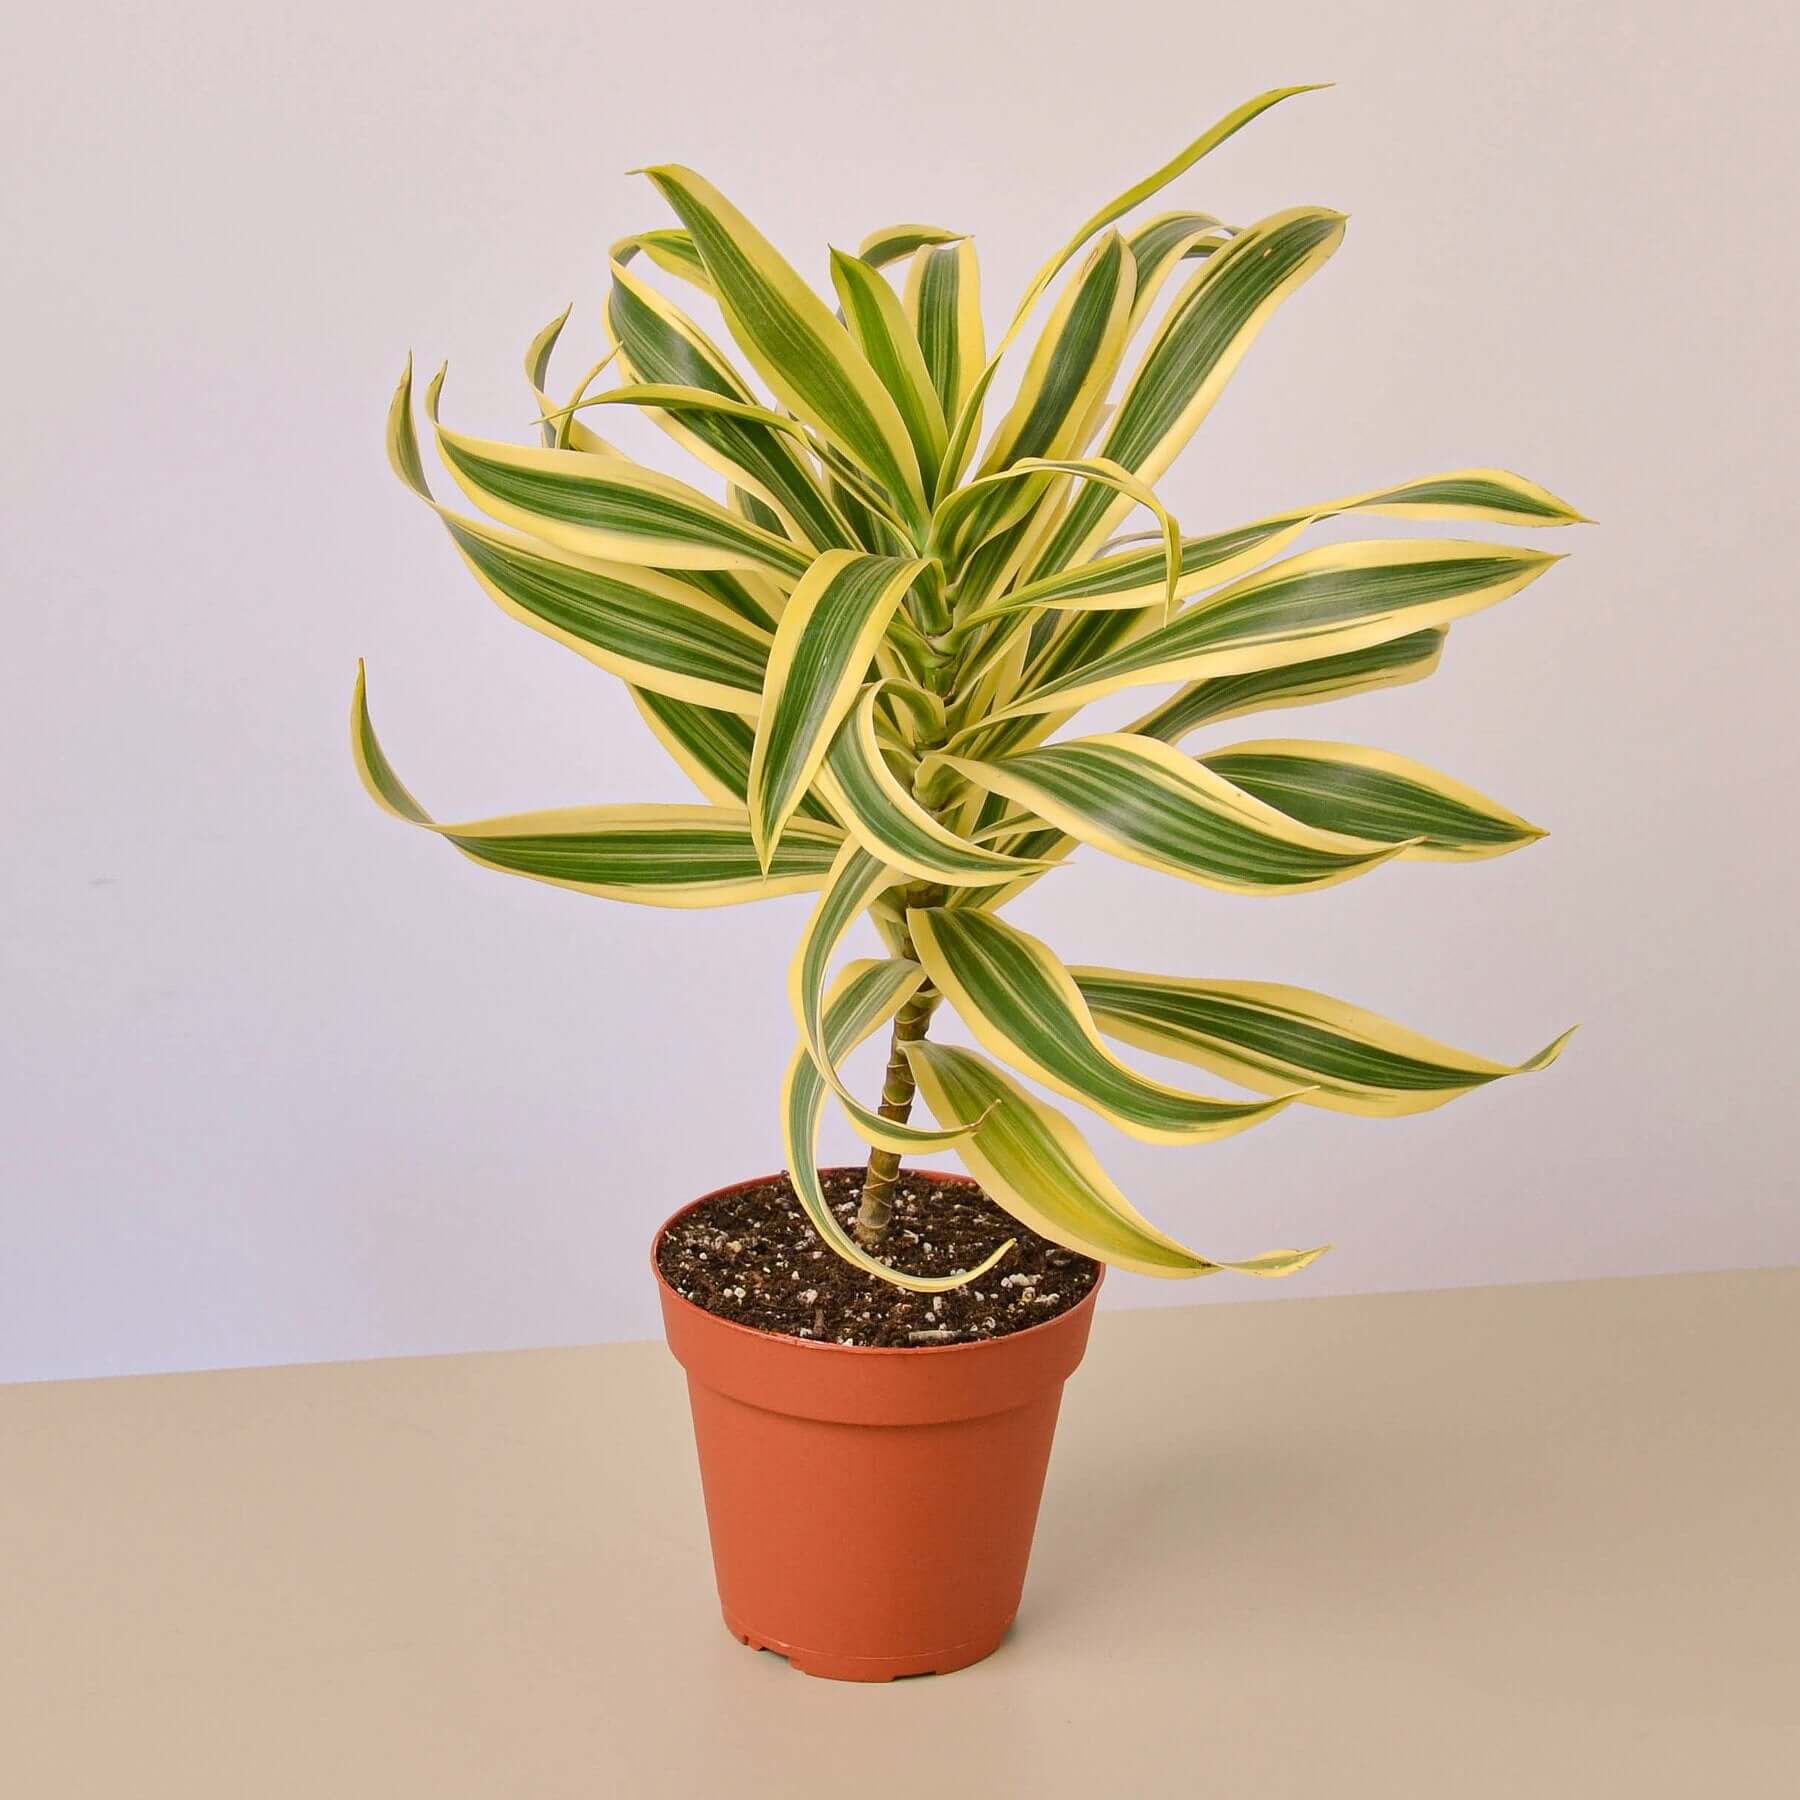 Dracaena - Song of India | Modern house plants that clean the air